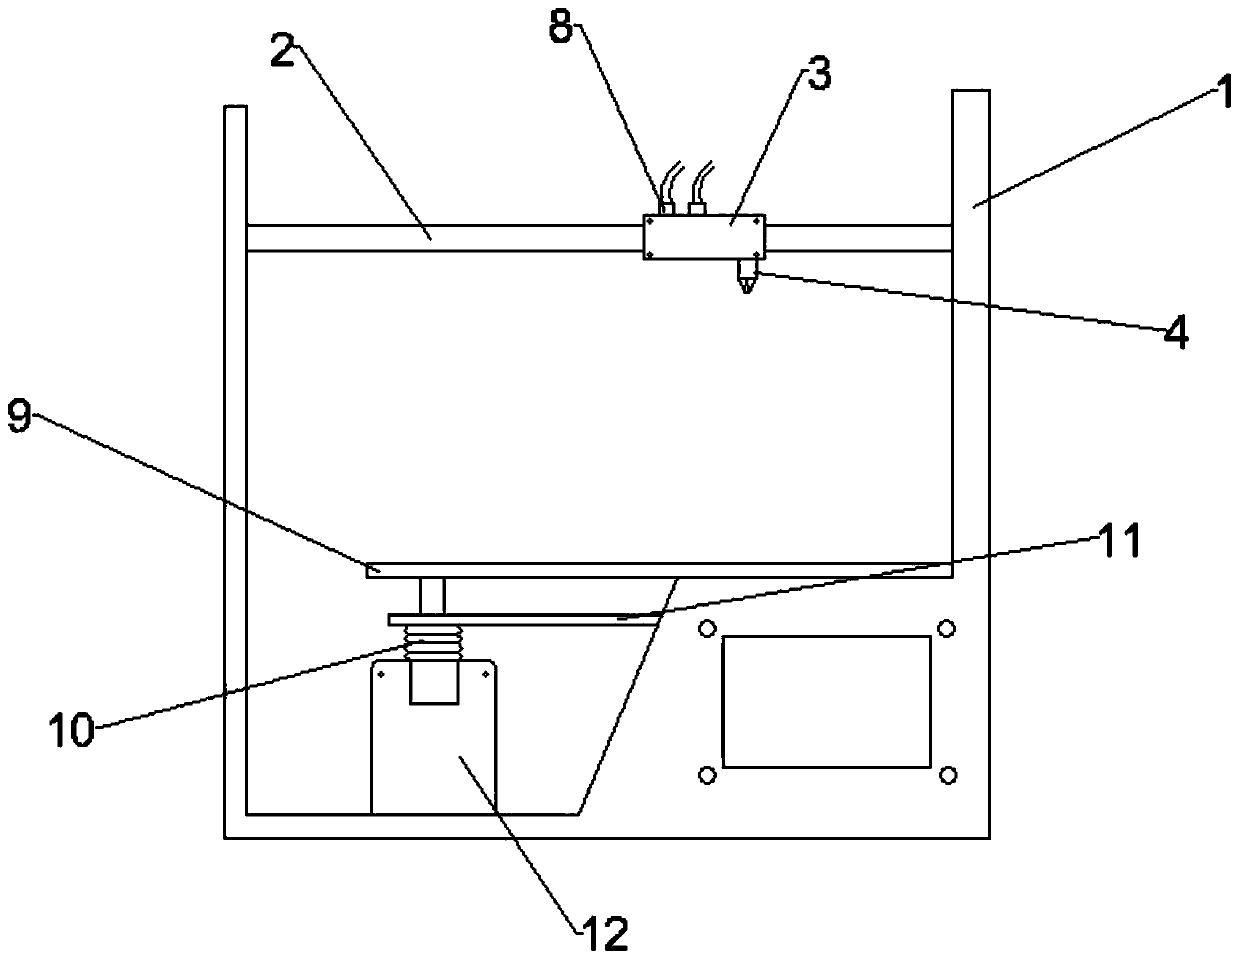 Device for detecting and adjusting hot bed platform in printing process of 3D printer